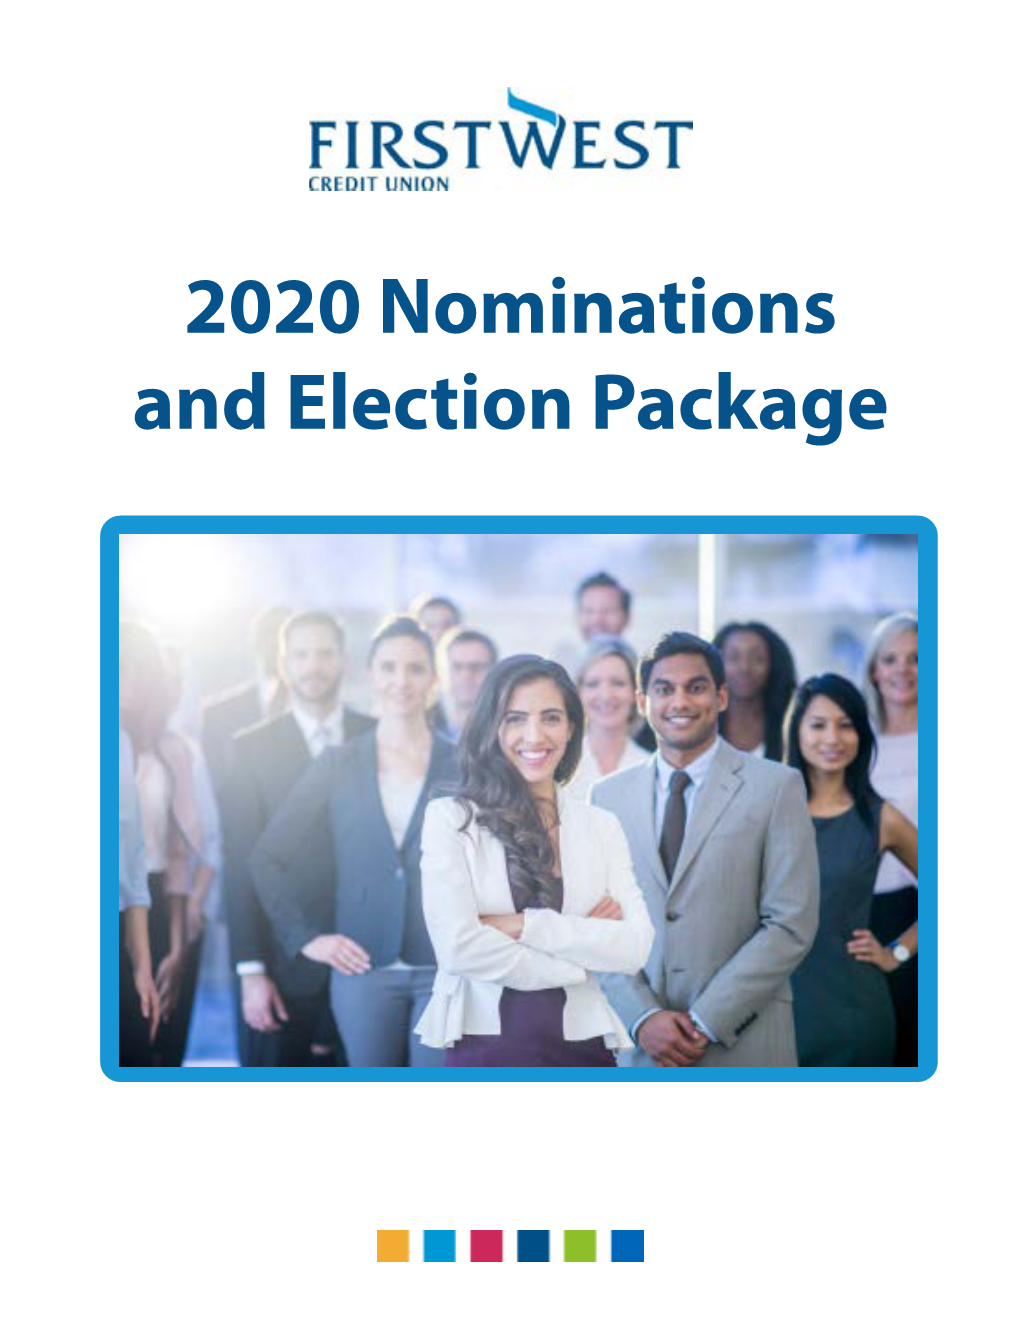 2020 Nominations and Election Package Table of Contents